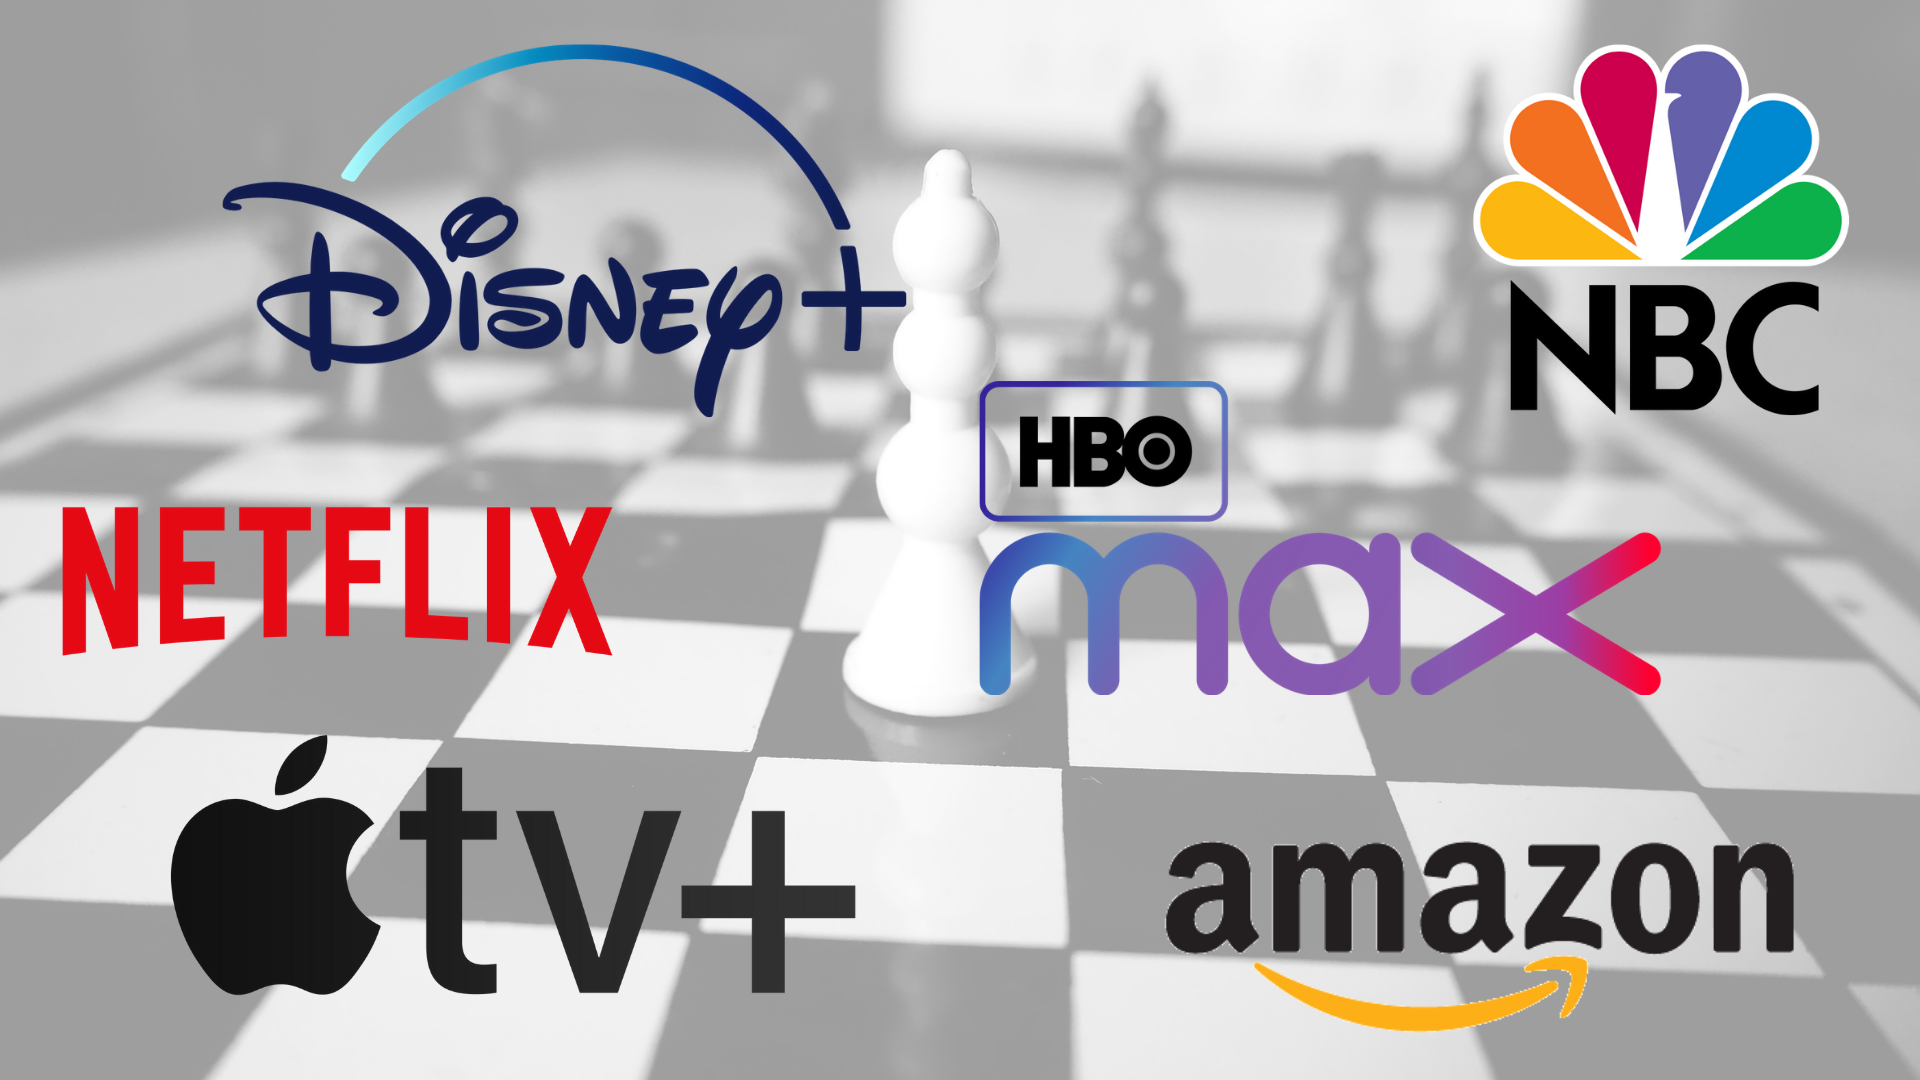 Netflix Beating Amazon, Hulu, Disney+ With 42% Share As Streaming Doubles, Streaming service Disney+ crosses 50 million paid subscribers globally and other top news